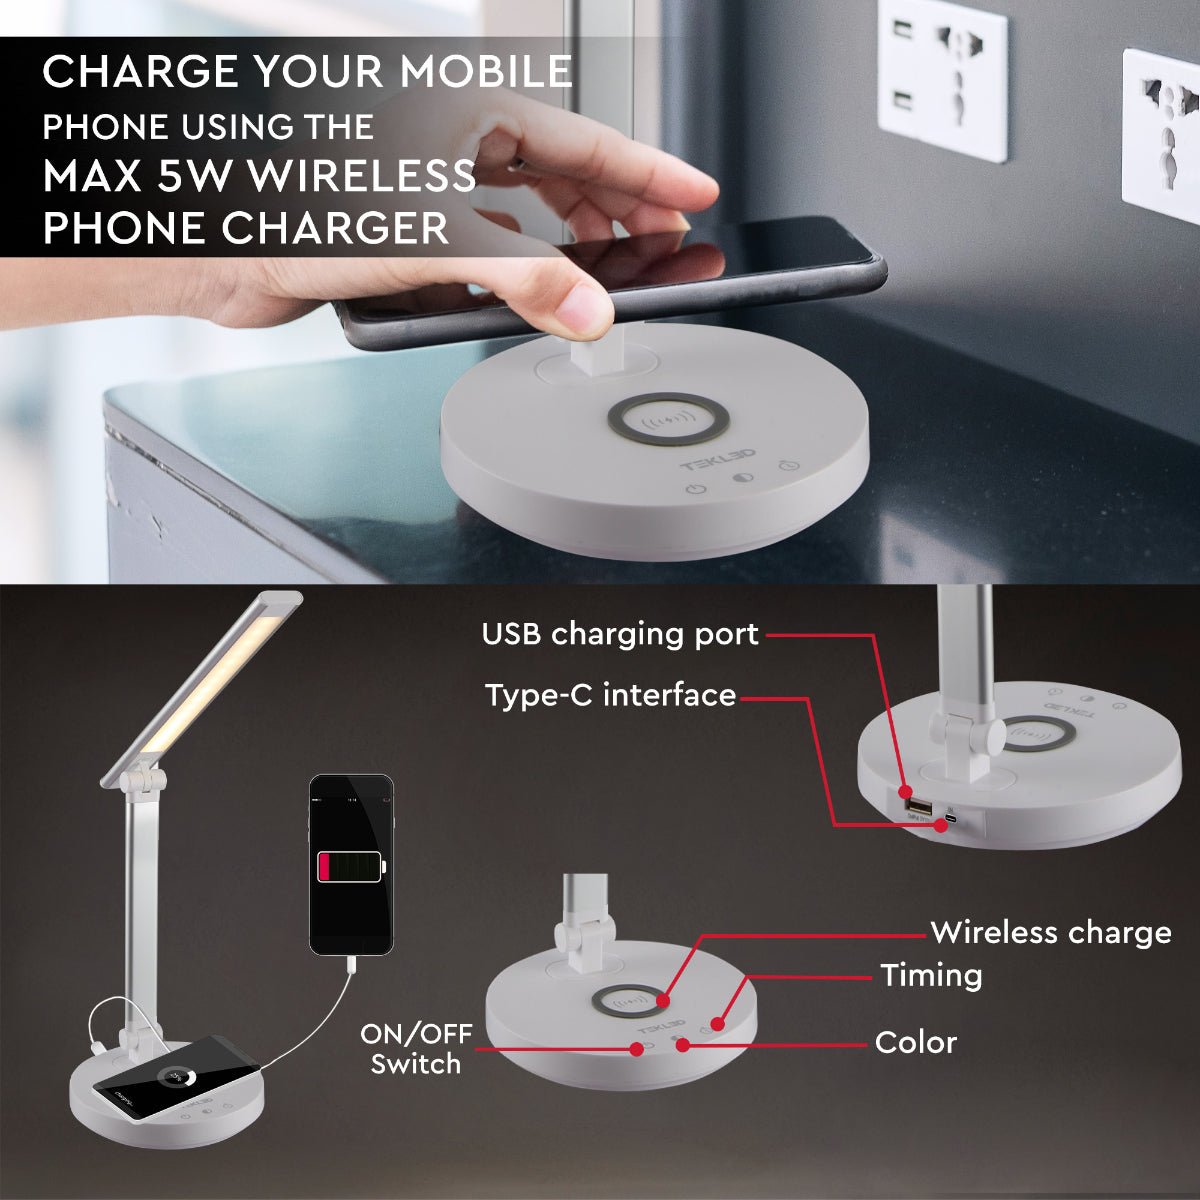 User manual for Lingo Silver Desk Light Dimmable and Colour Modes with Wireless Phone Charger | TEKLED 130-03624